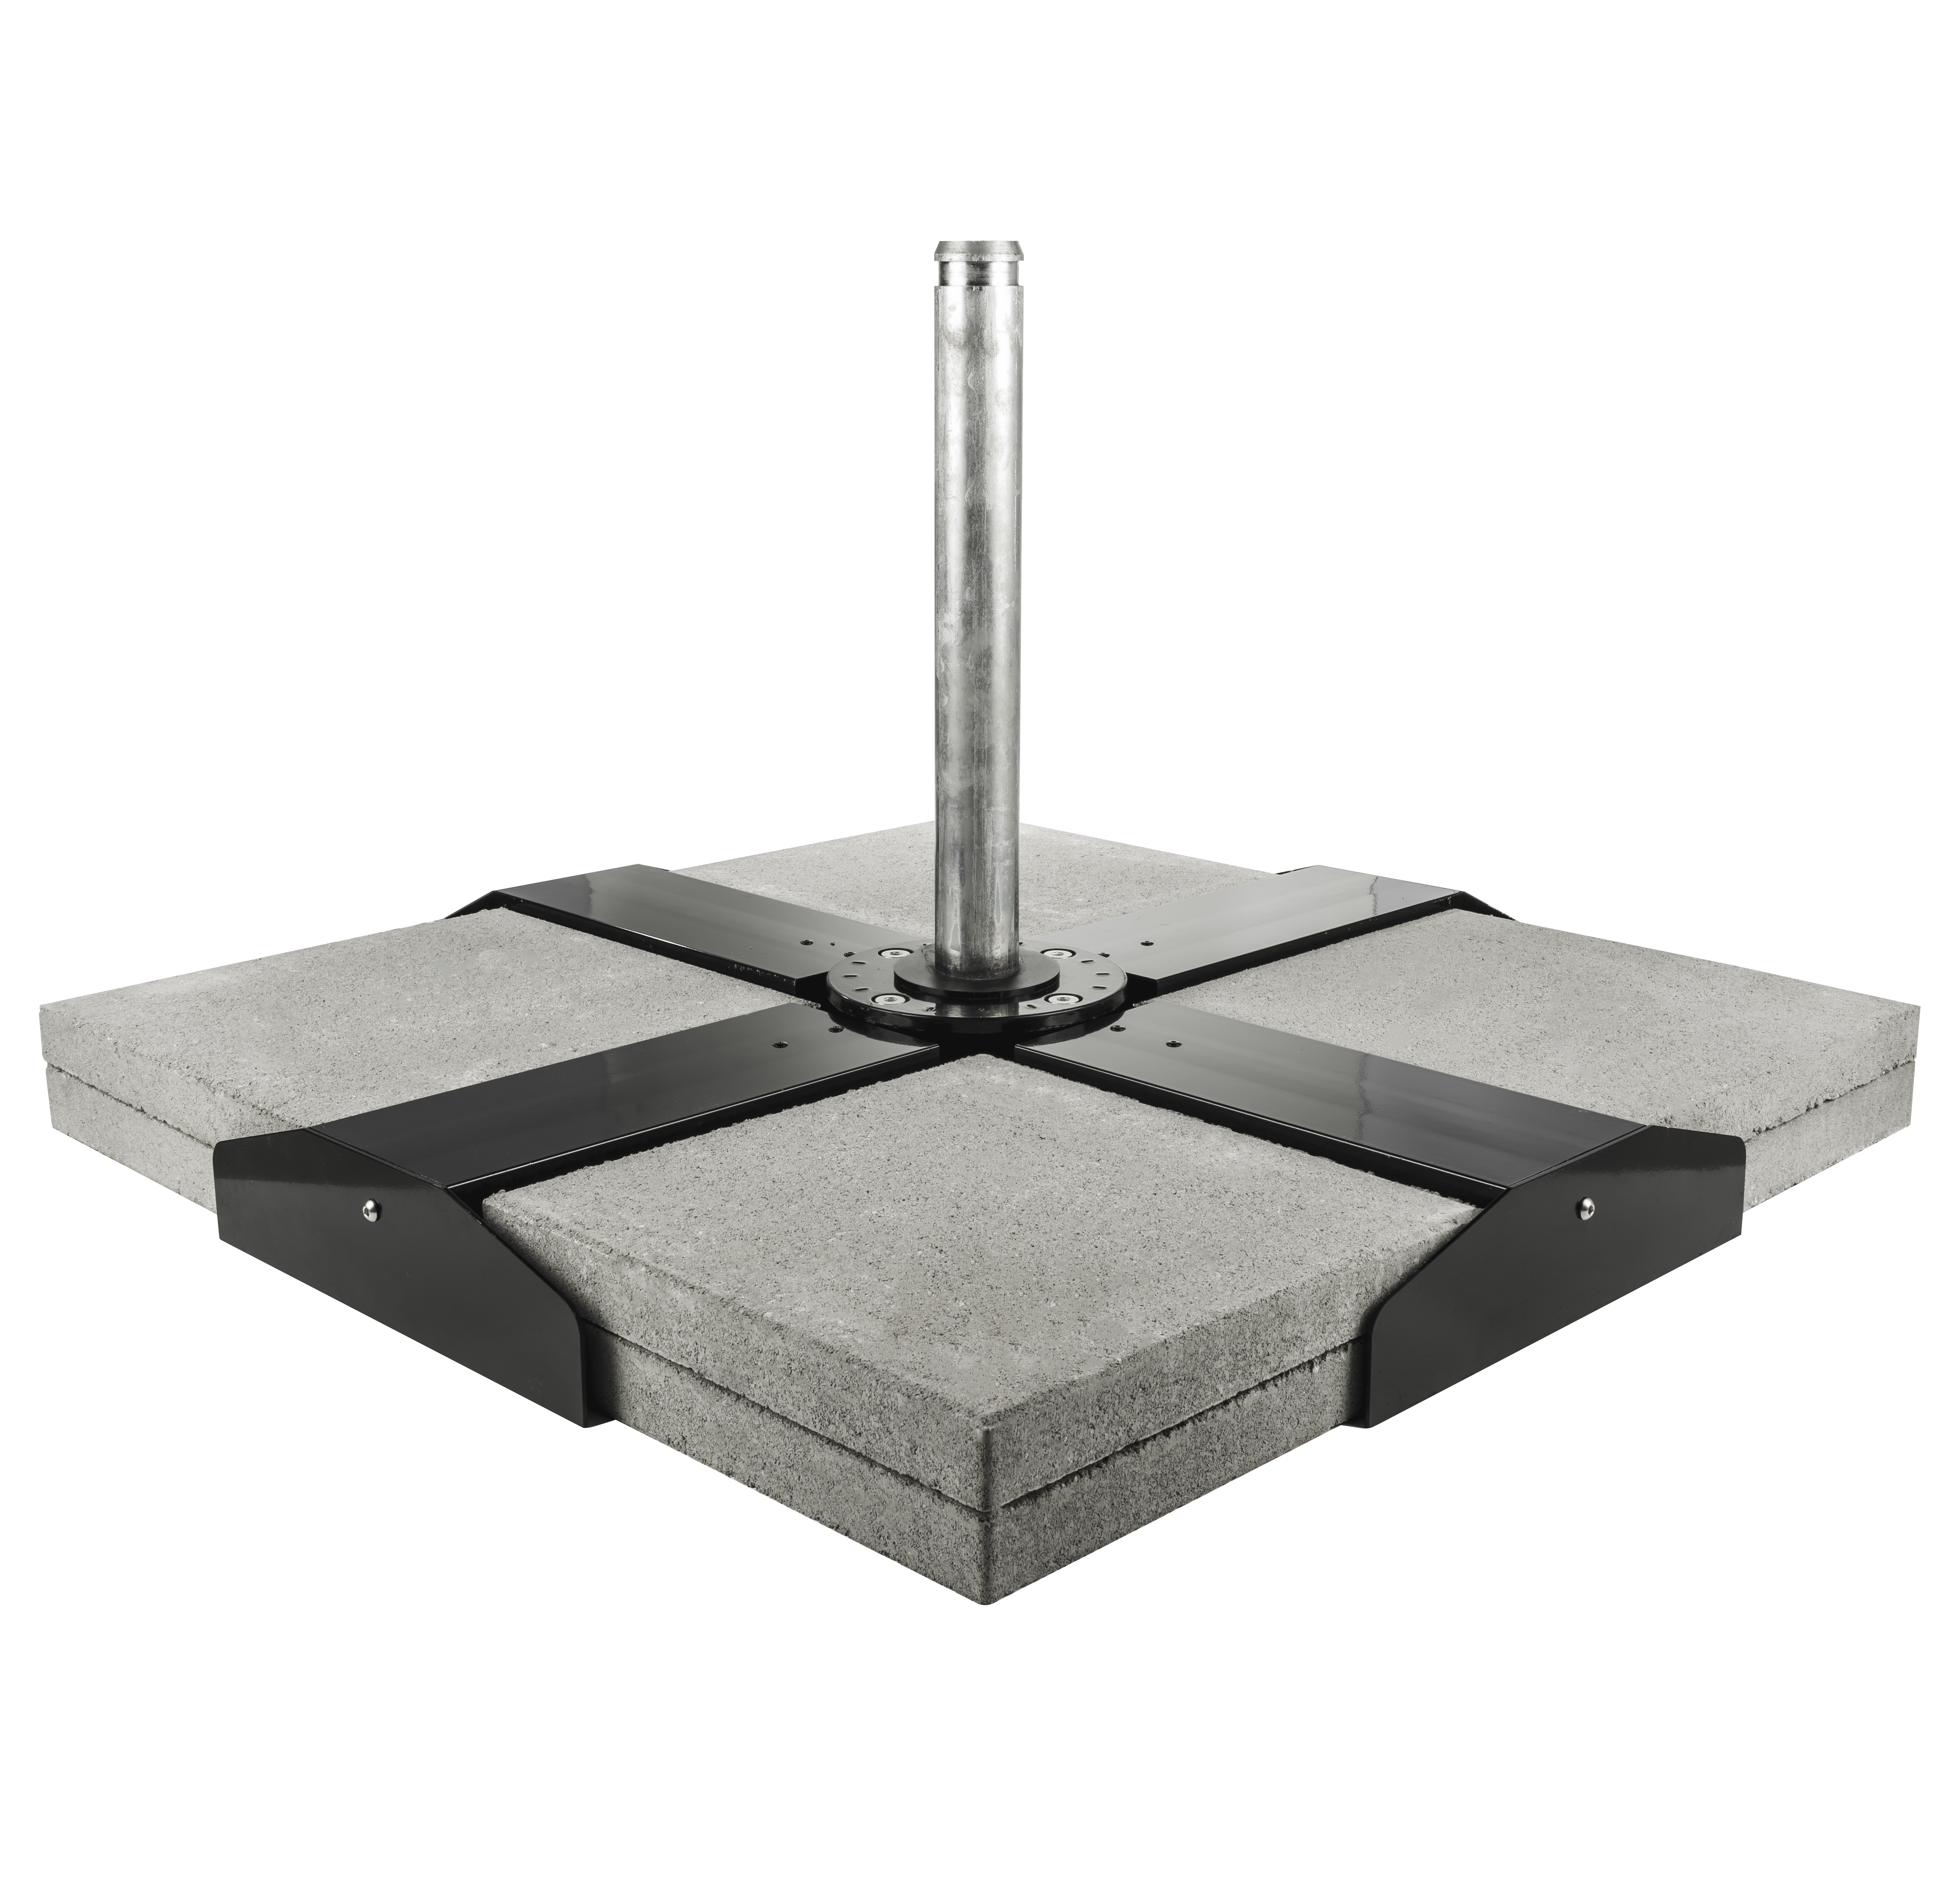 Cross Base Shown With Patio Block(not included)
